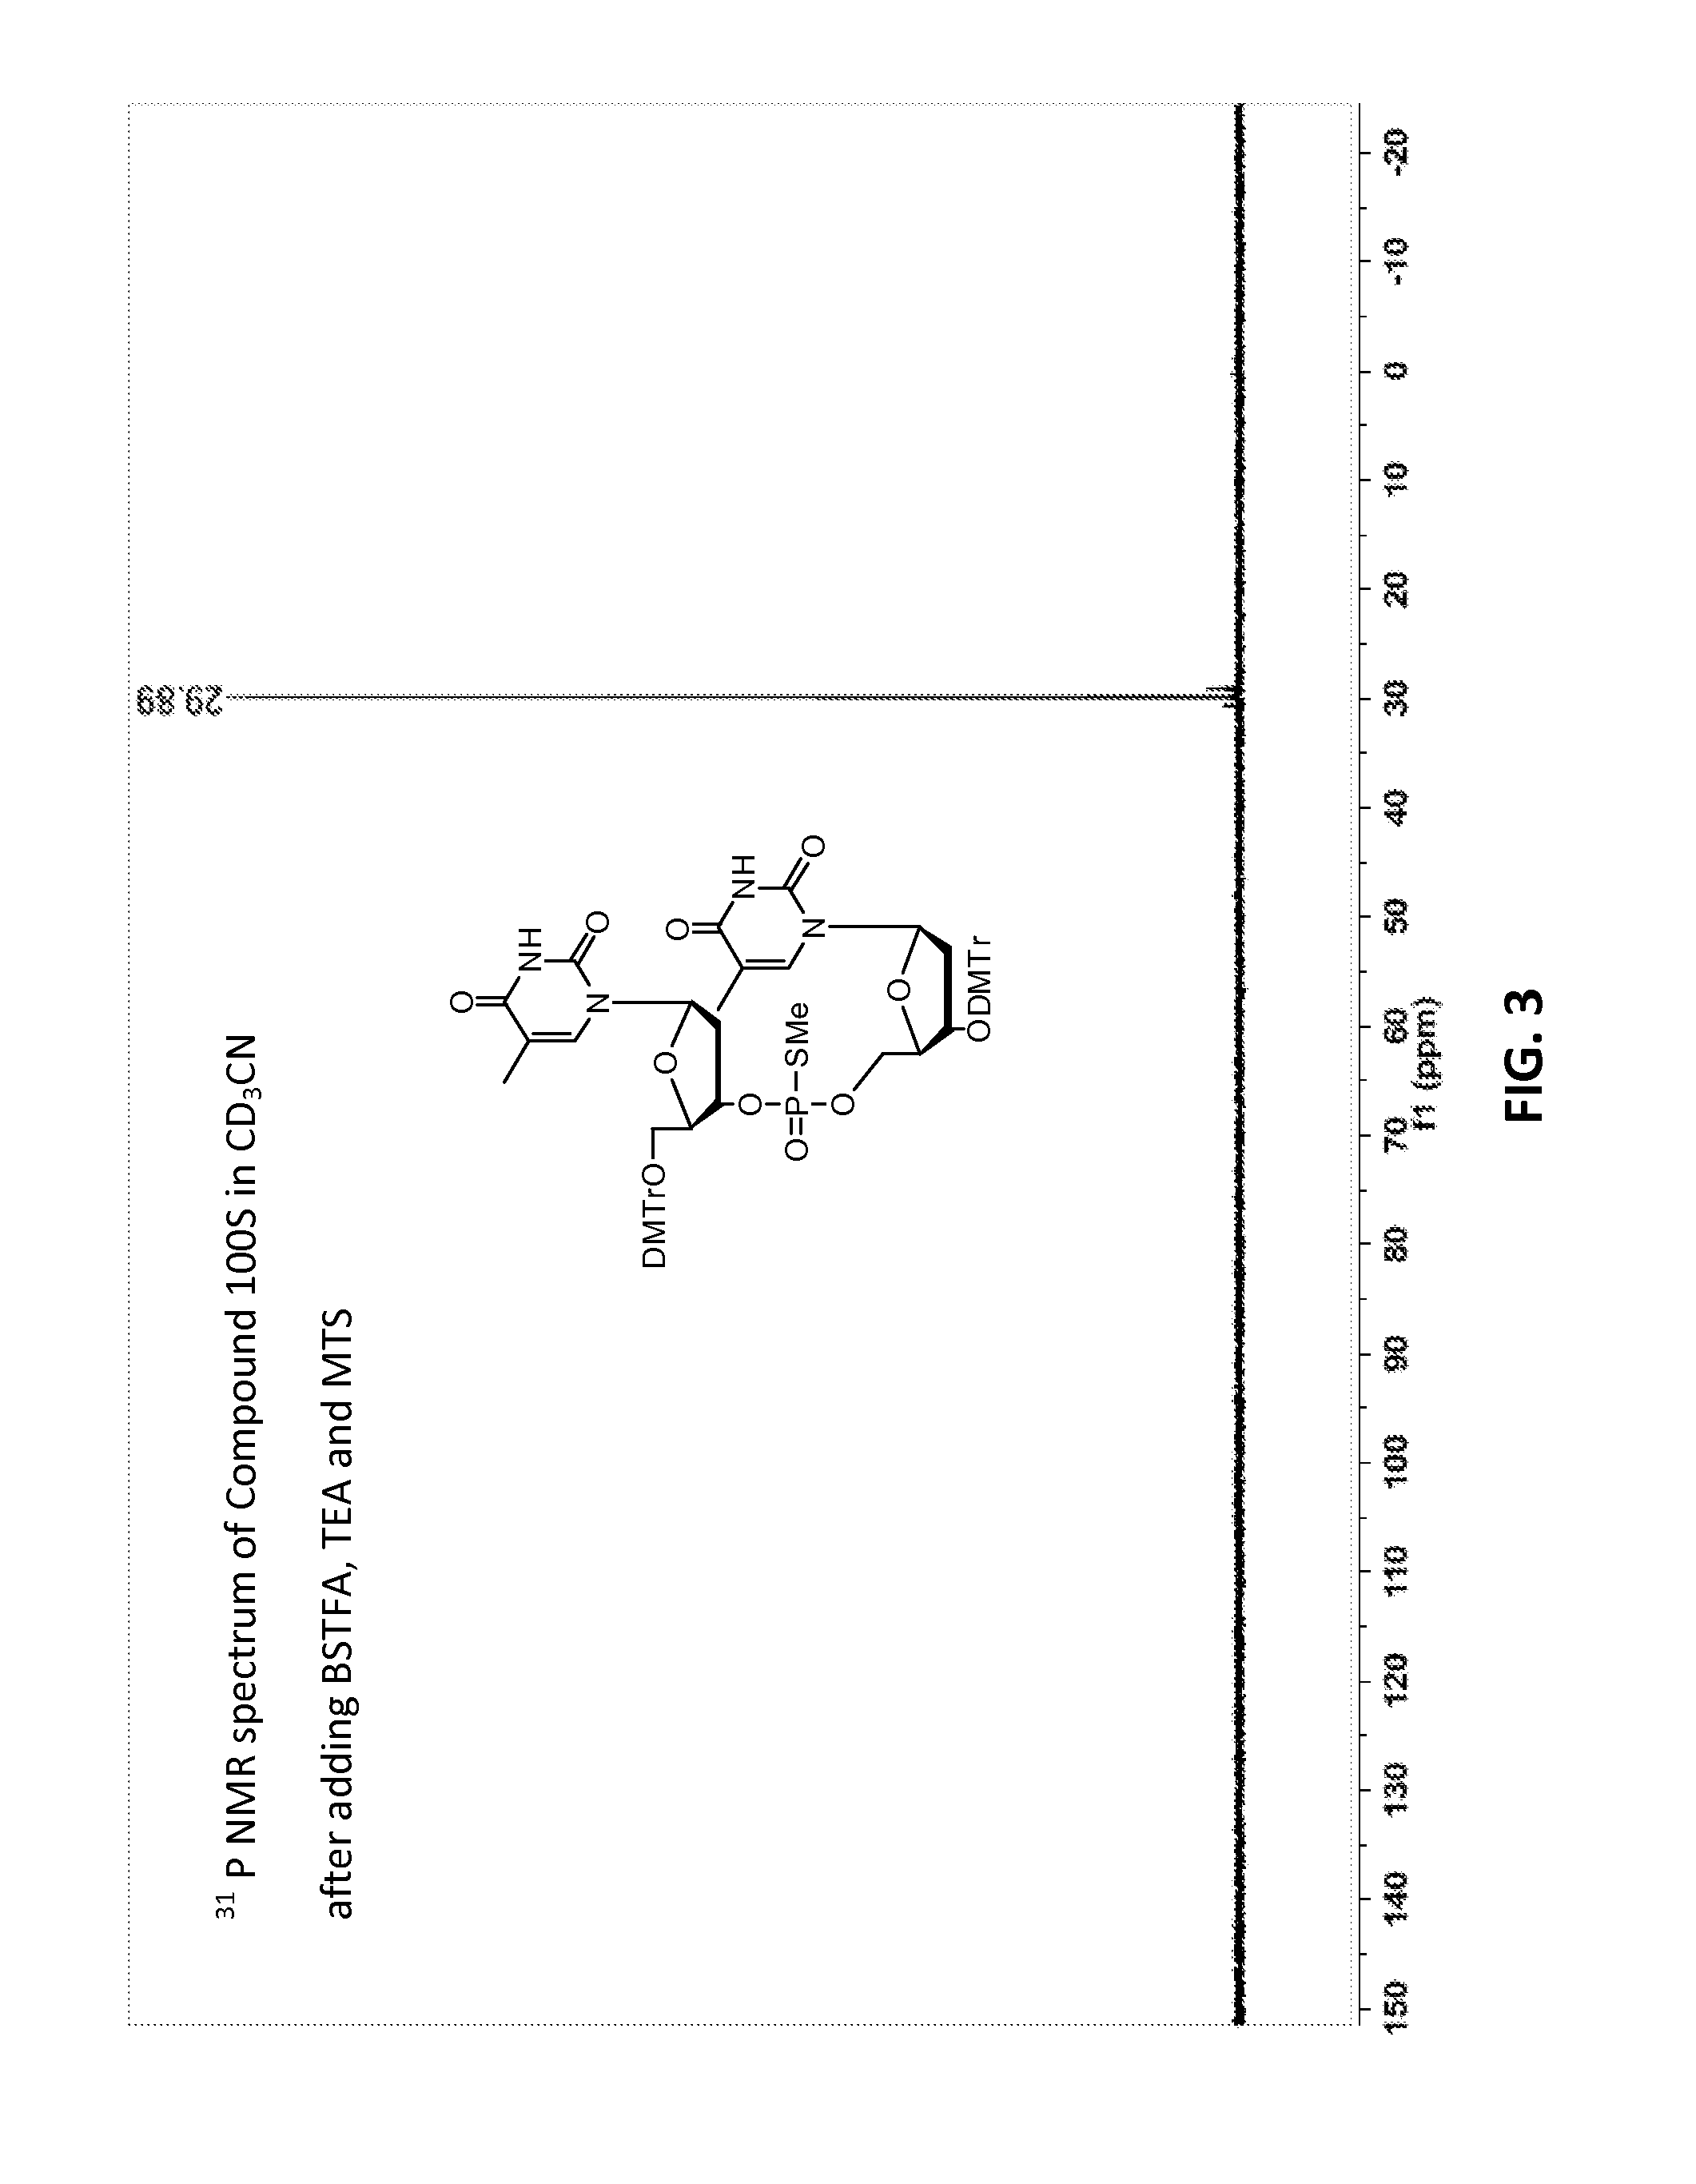 Methods for the synthesis of functionalized nucleic acids